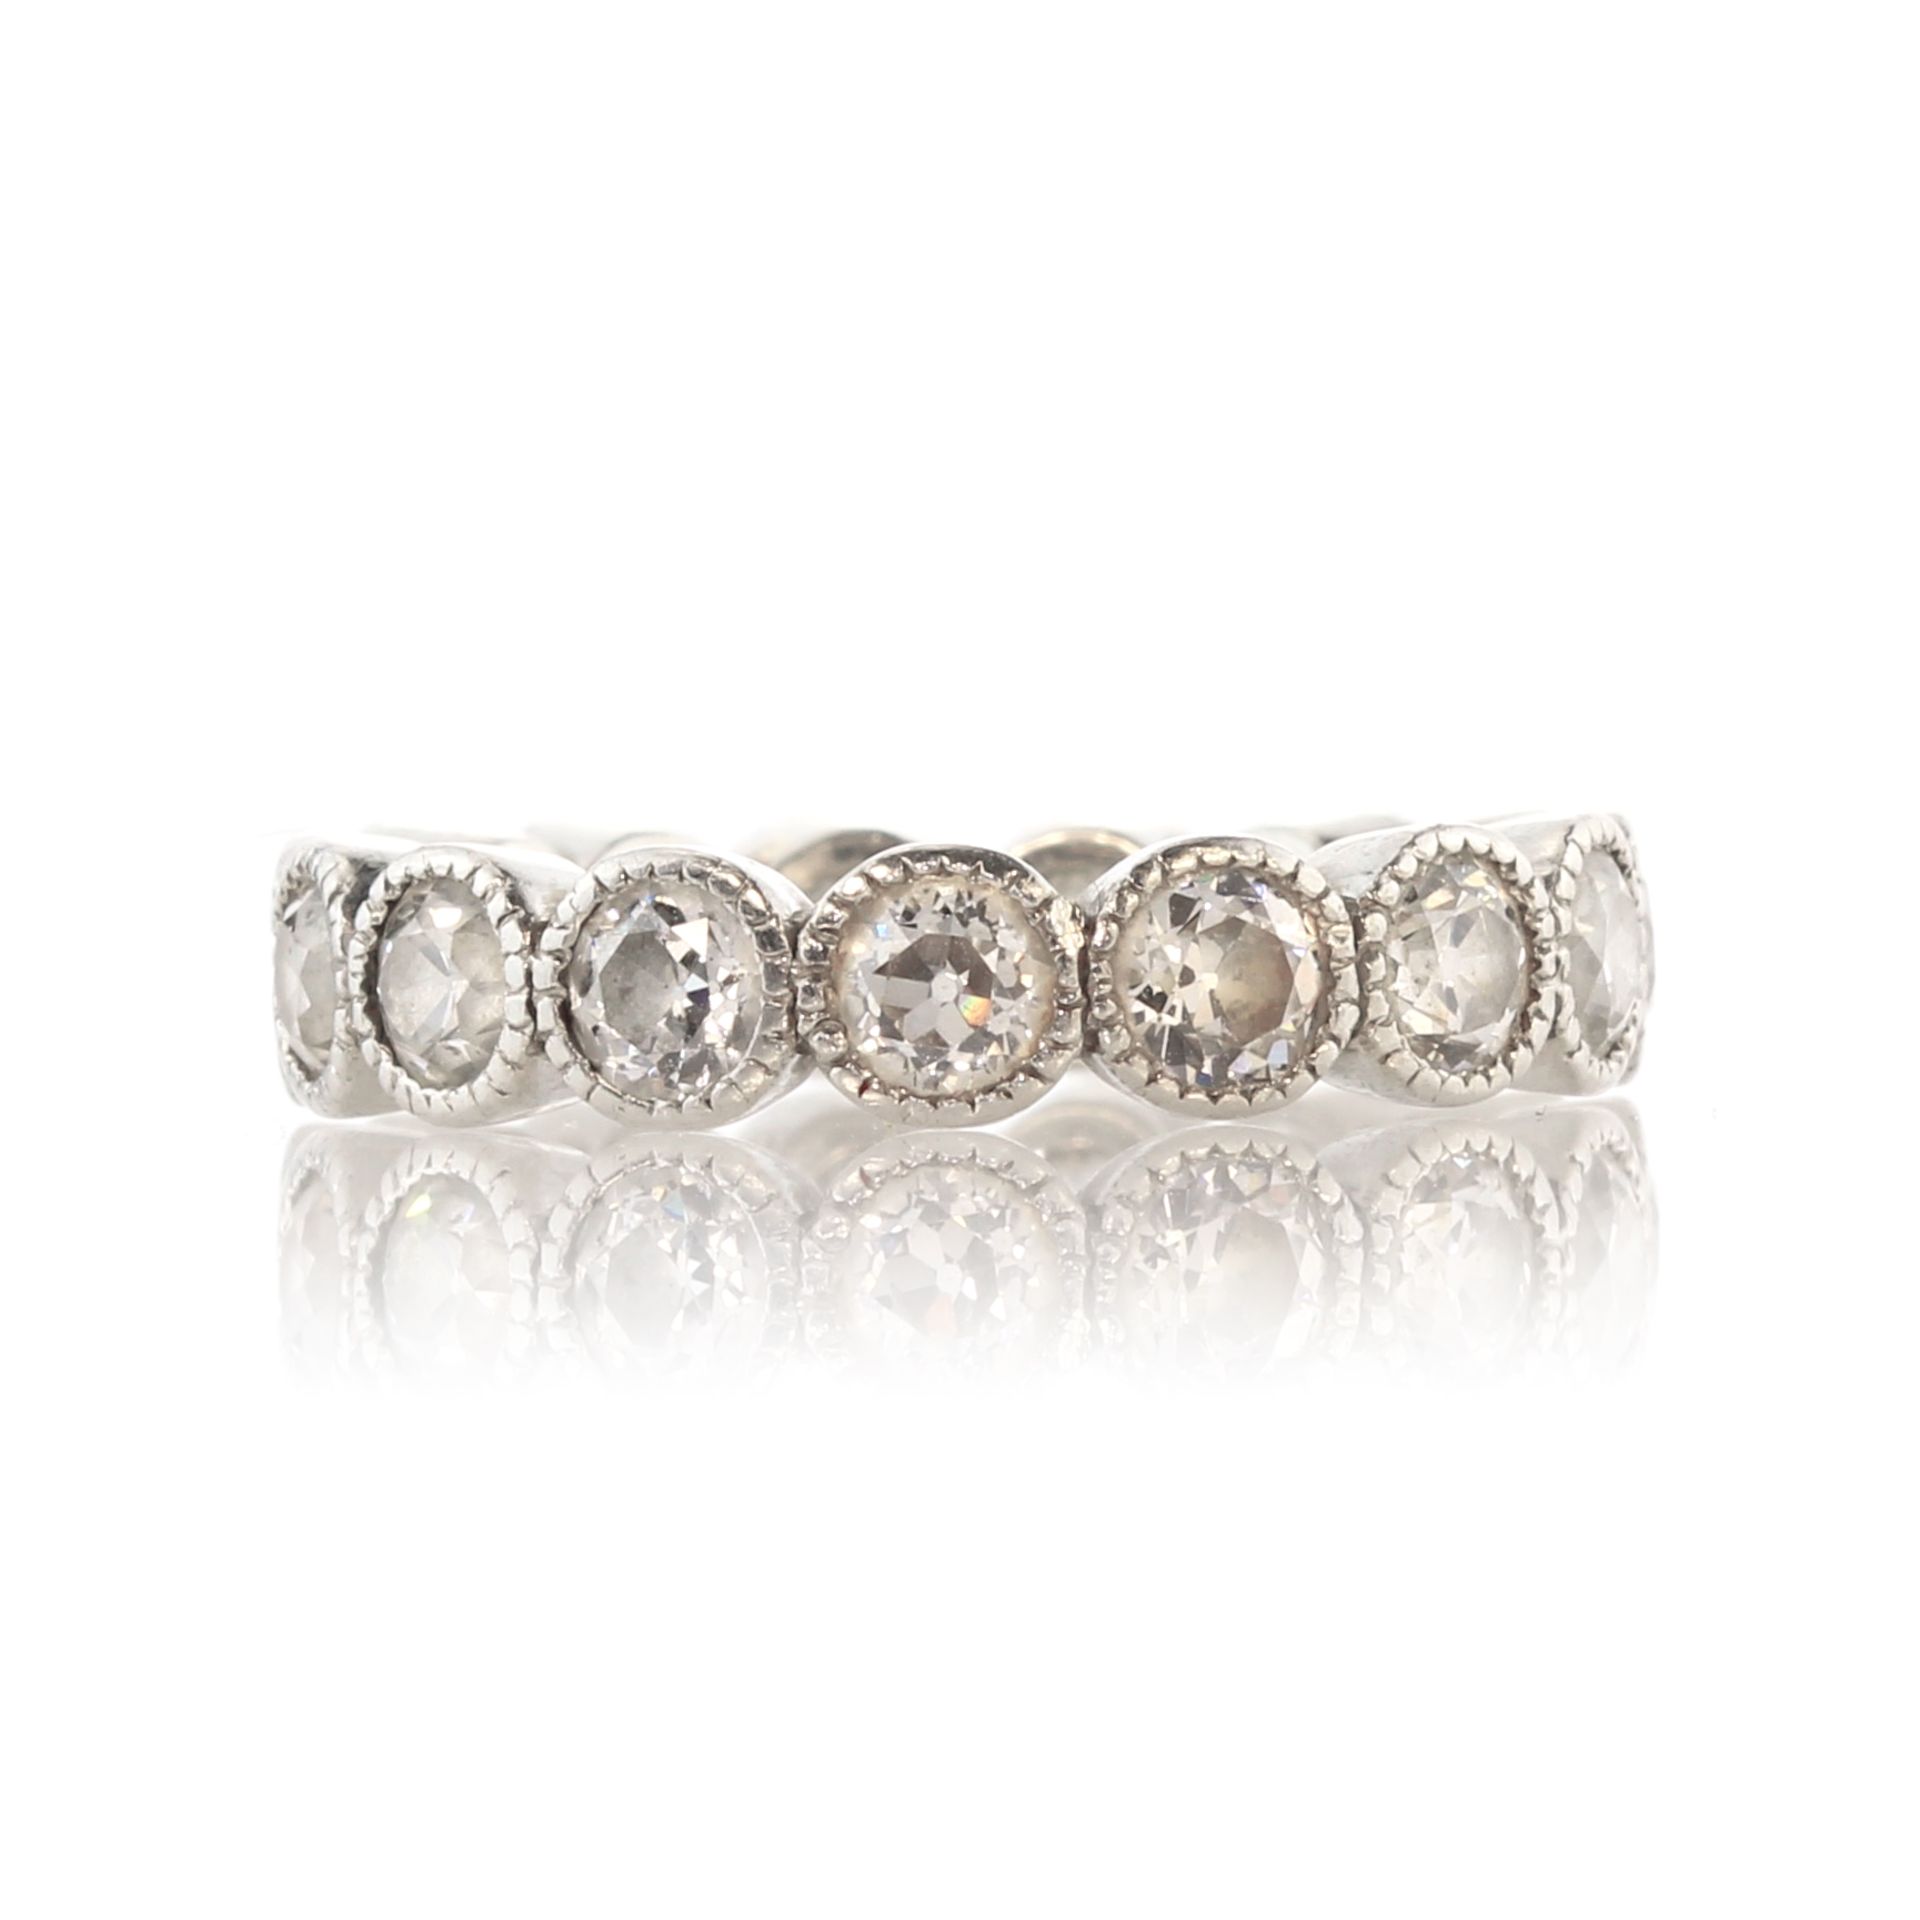 An antique diamond eternity ring in white gold or platinum set with fifteen old round cut diamonds